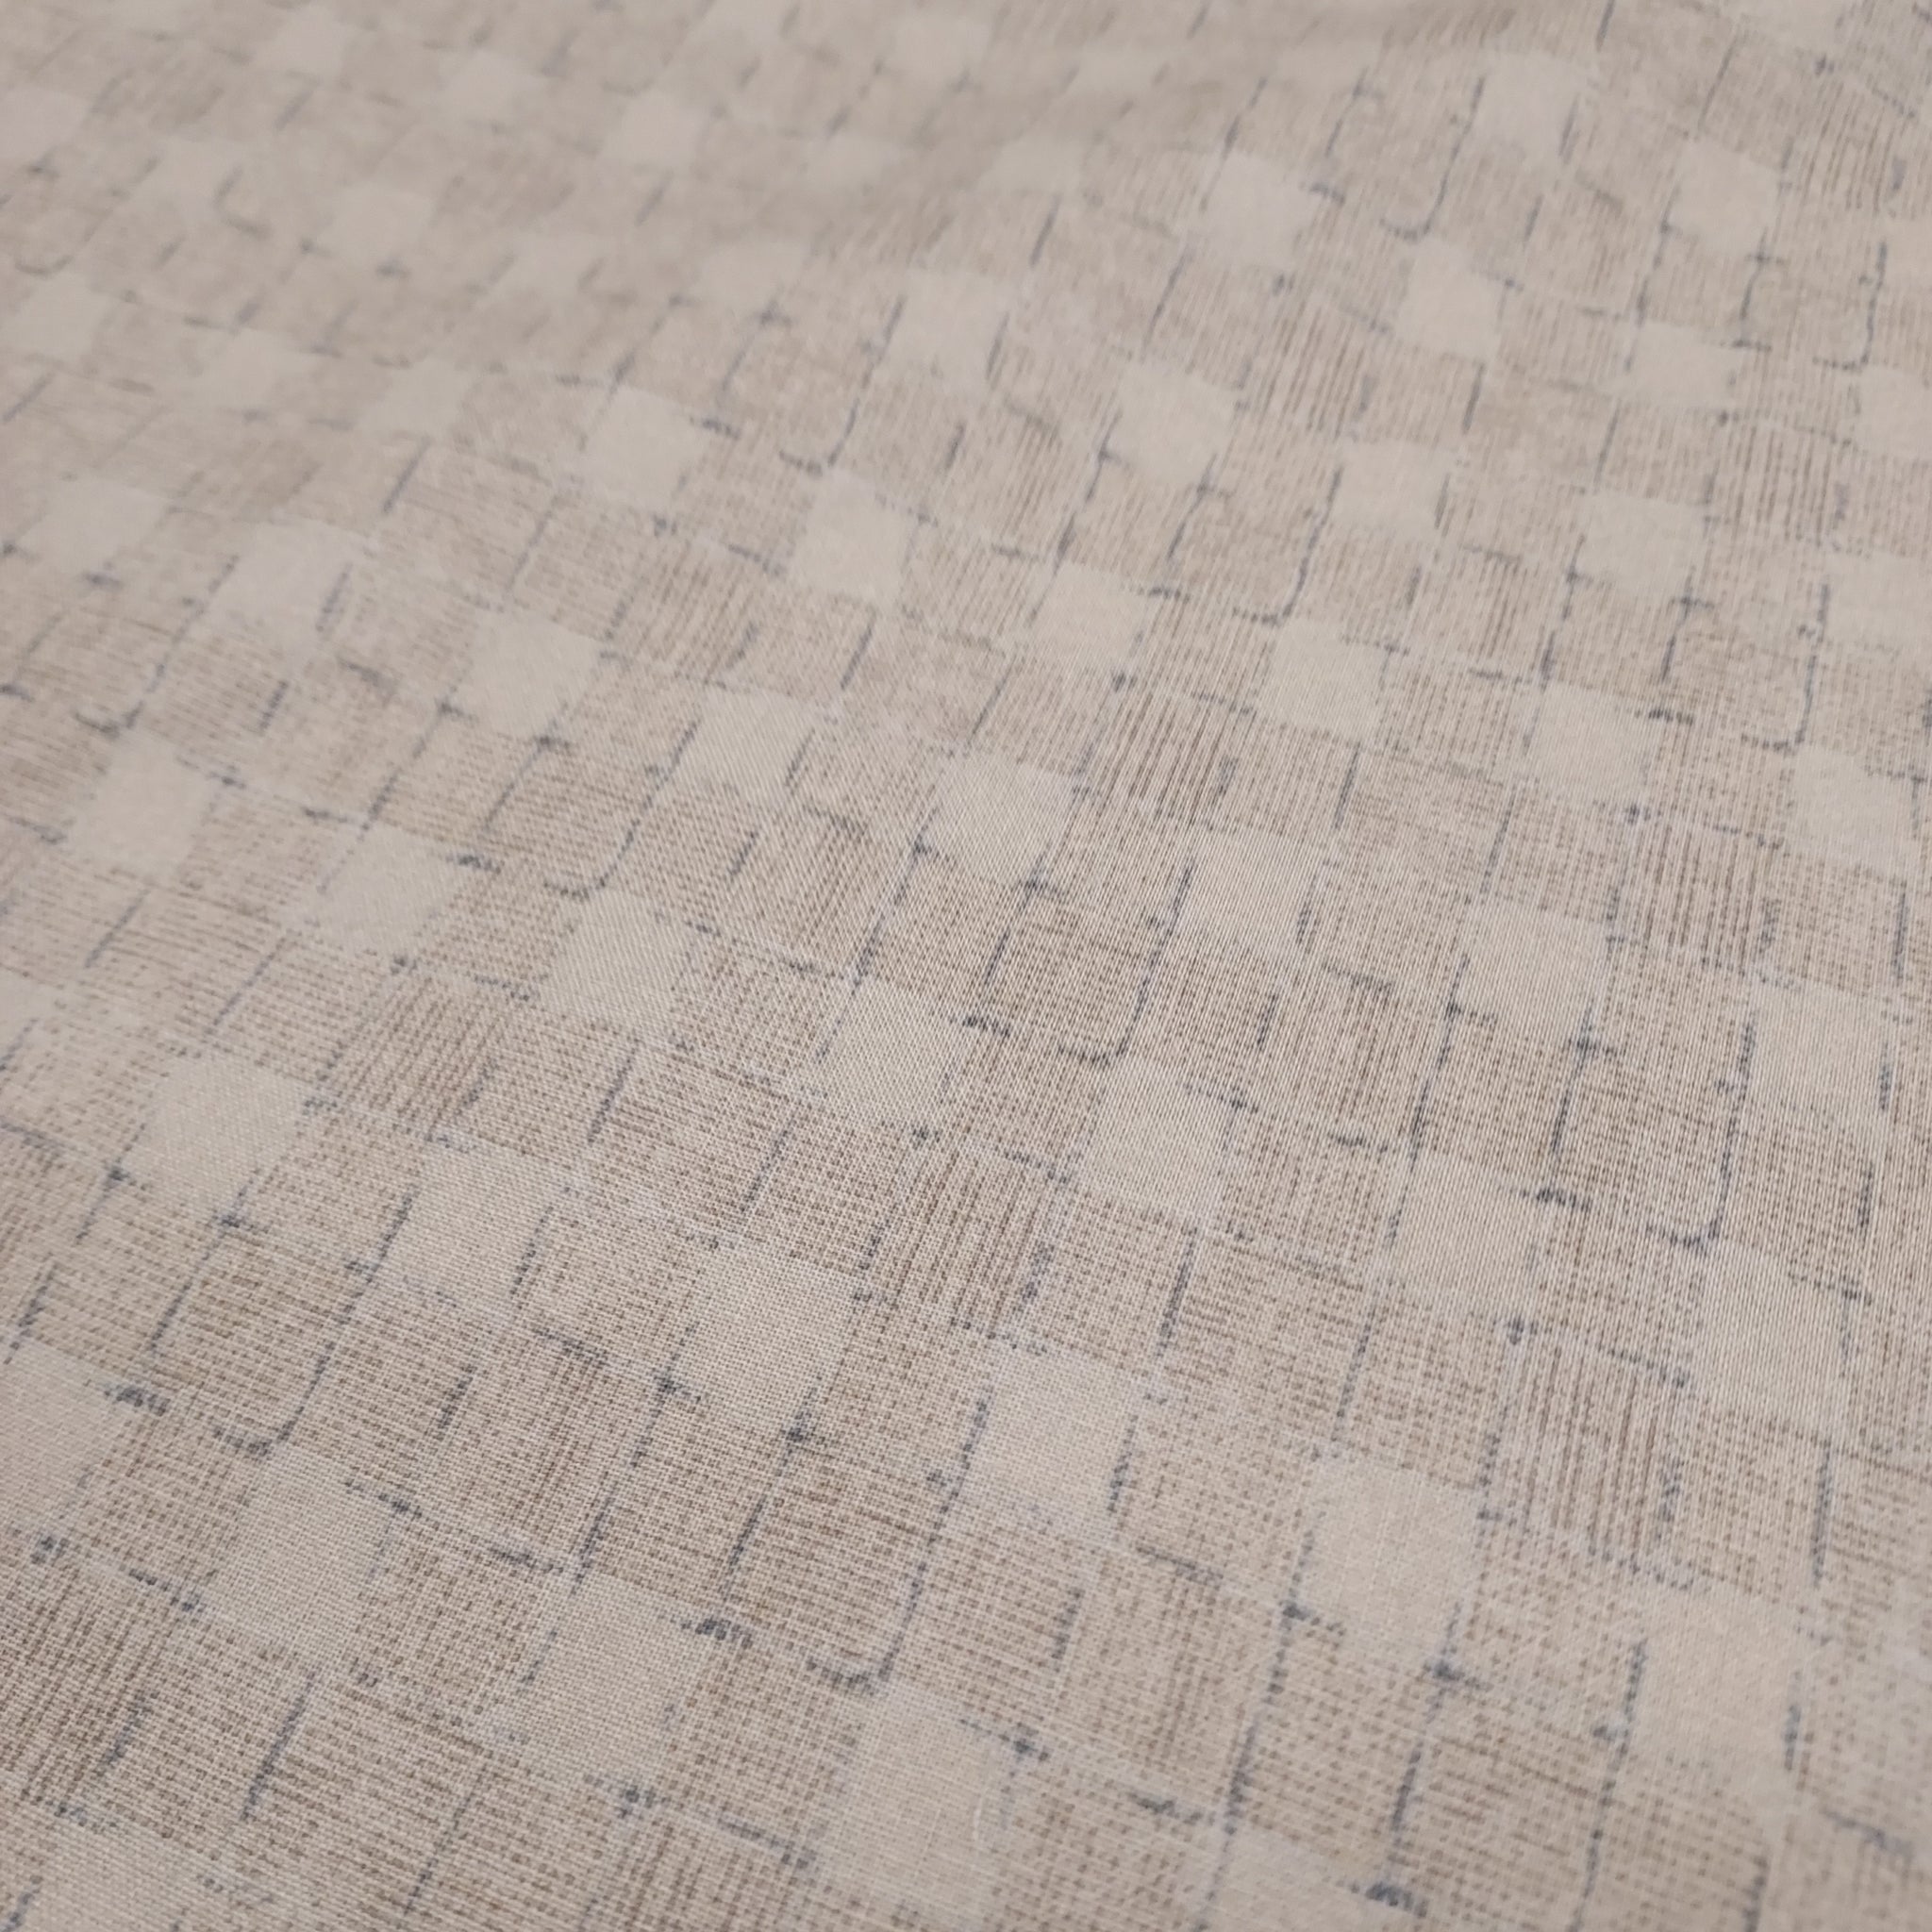 This beautiful cotton fabric is made in Japan. Soft hand and lightweight feel, this fabric has a light taupe background with a taupe and blue grid pattern on top. The grid pattern almost looks like a loose basket weave. This fabric is beautiful and would be suitable for quilting or apparel sewing.   Variant style (CE10472S-A)